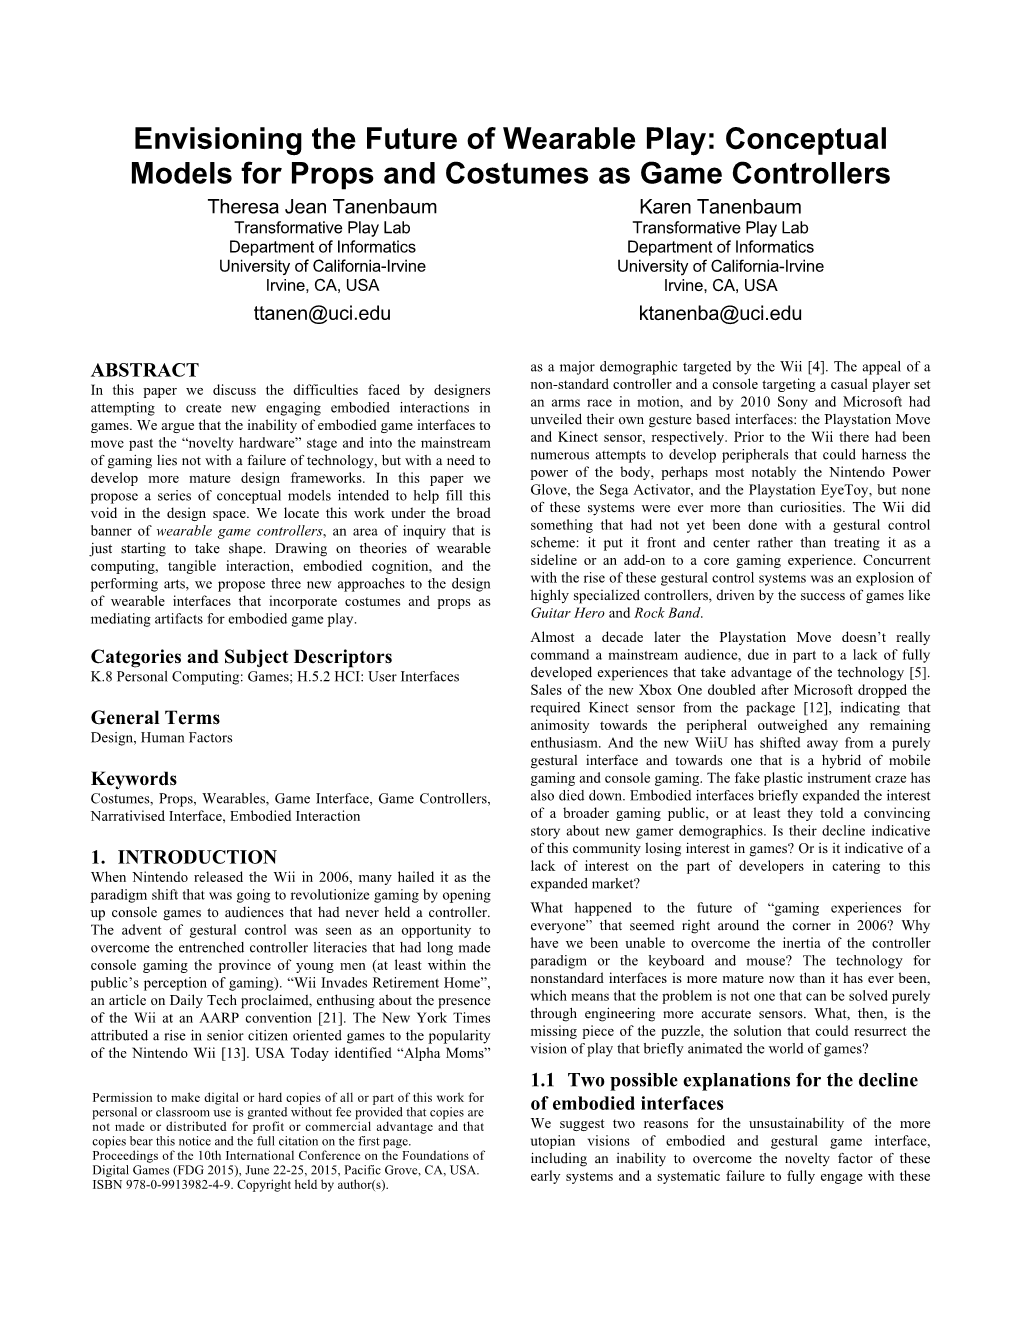 Conceptual Models for Props and Costumes As Game Controllers